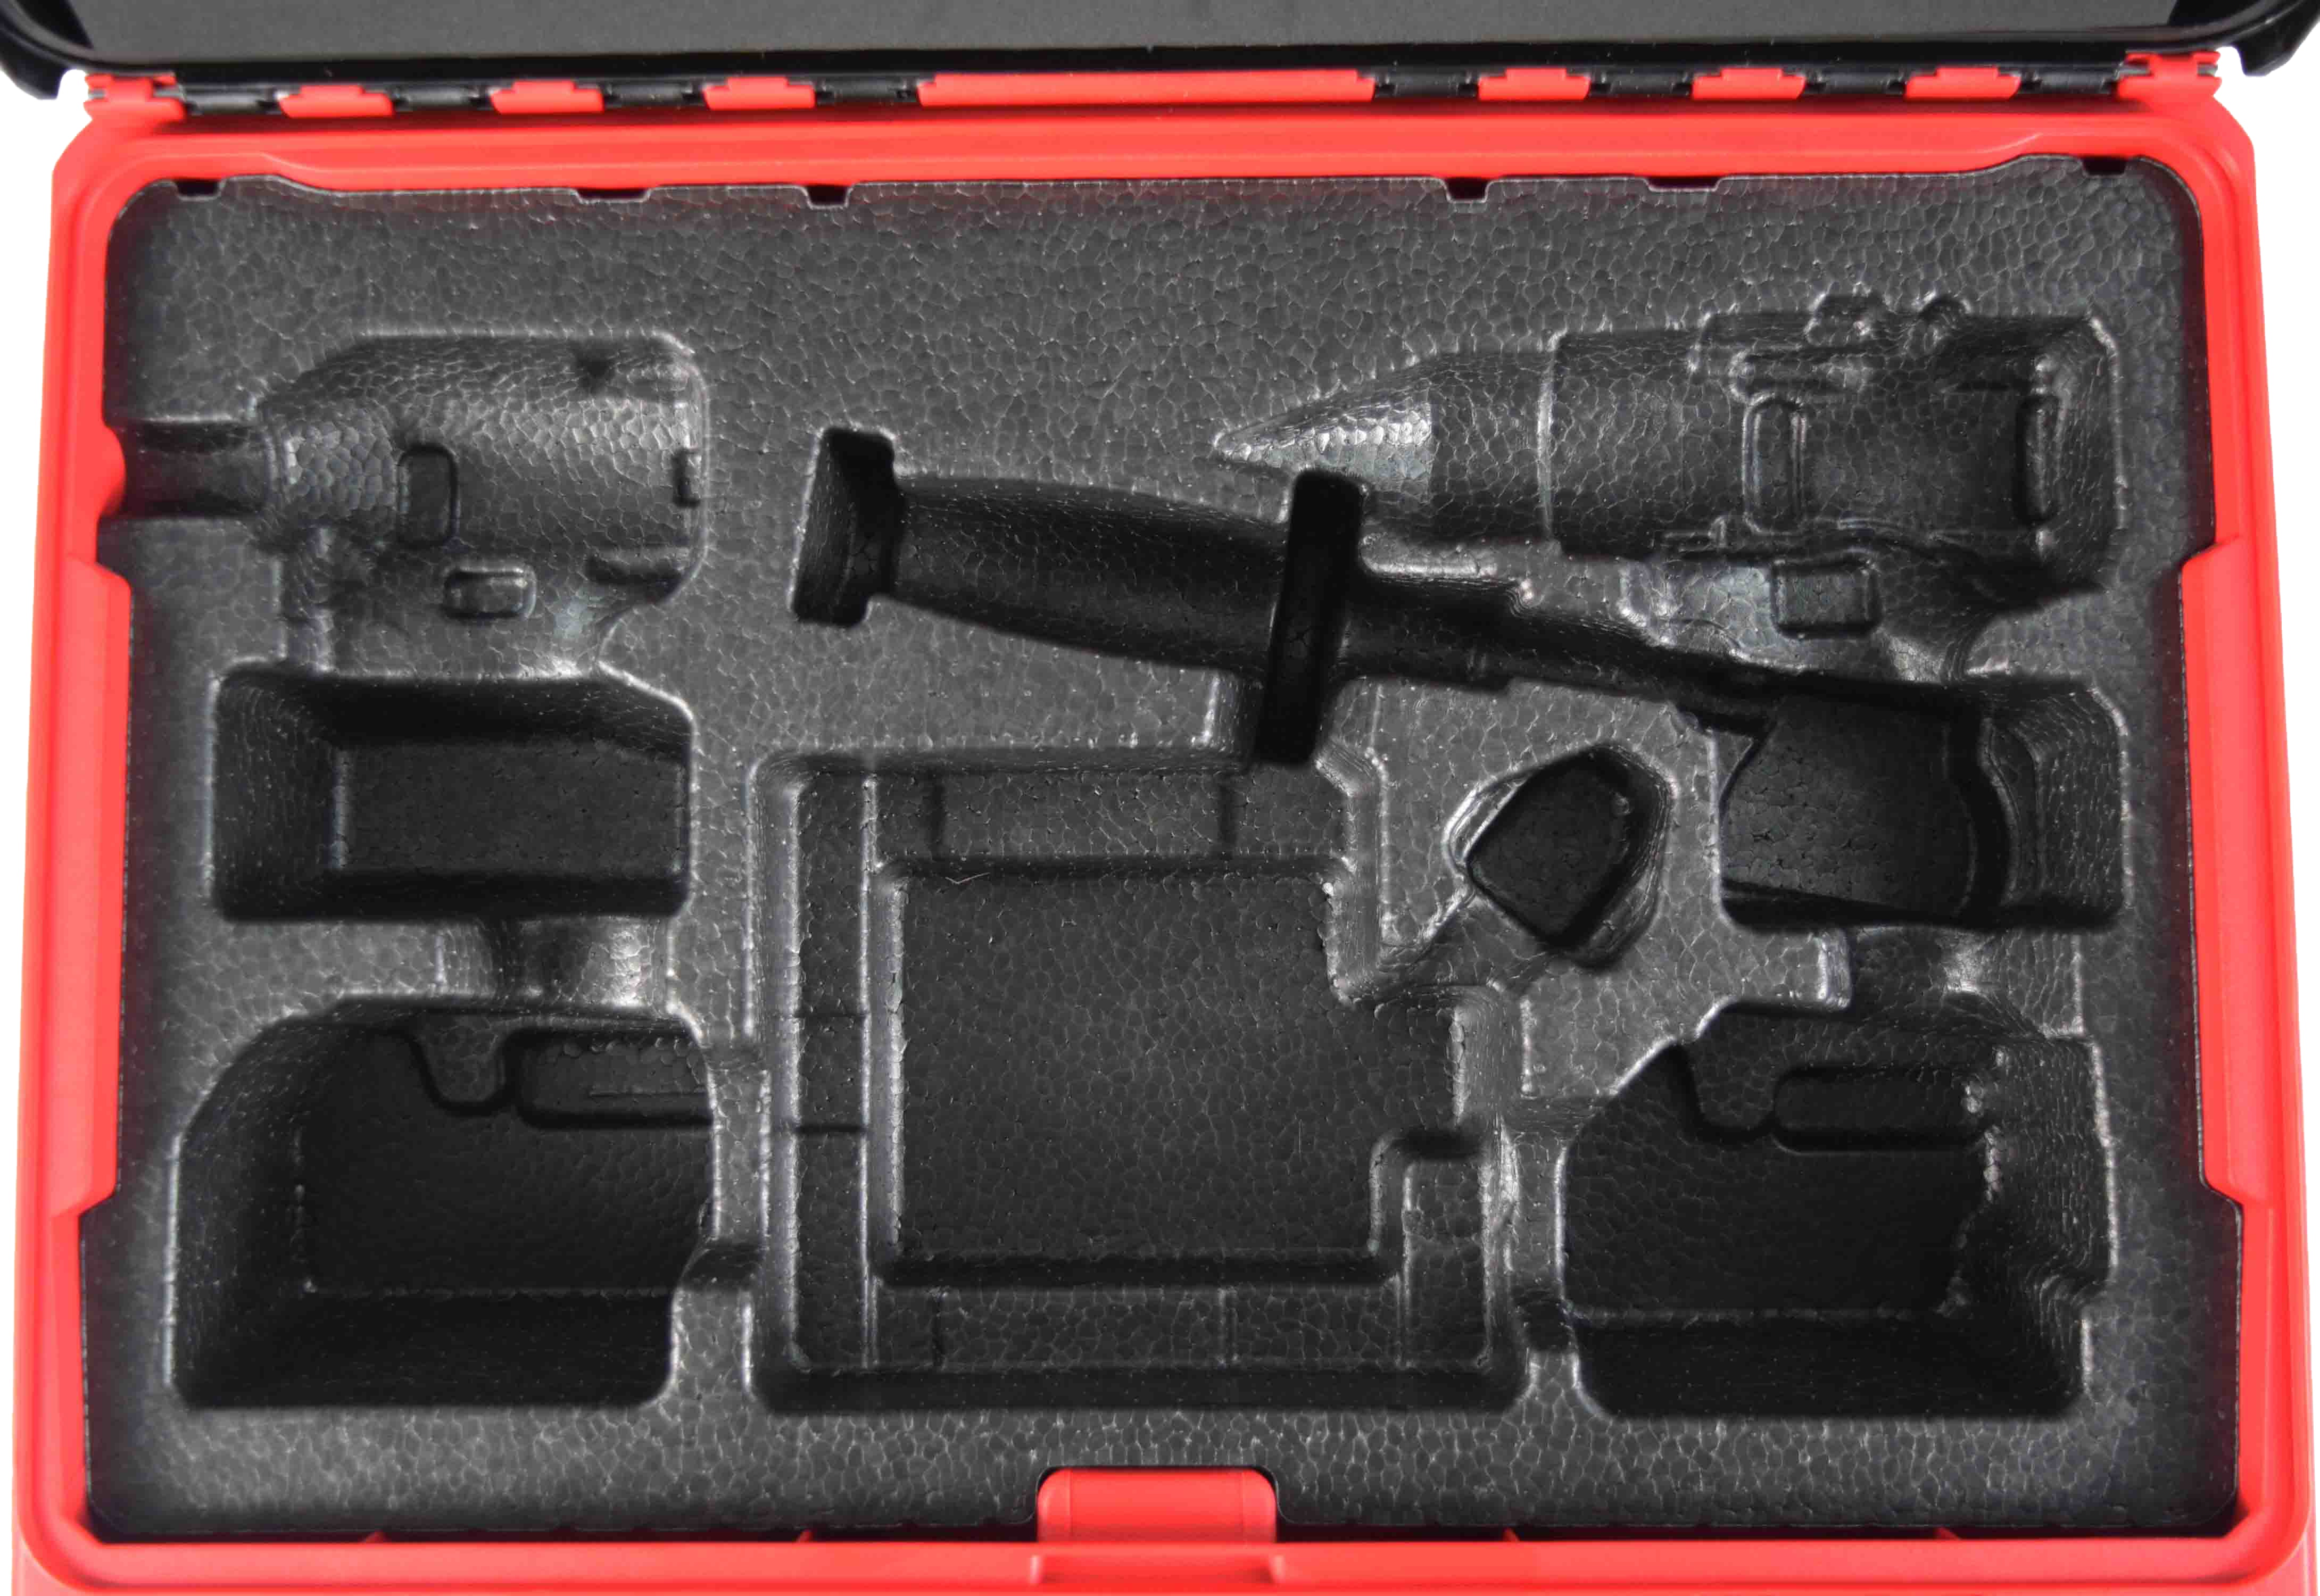 RED cut kit - foam insert for Milwaukee Compact Low Profile PackOut 8436